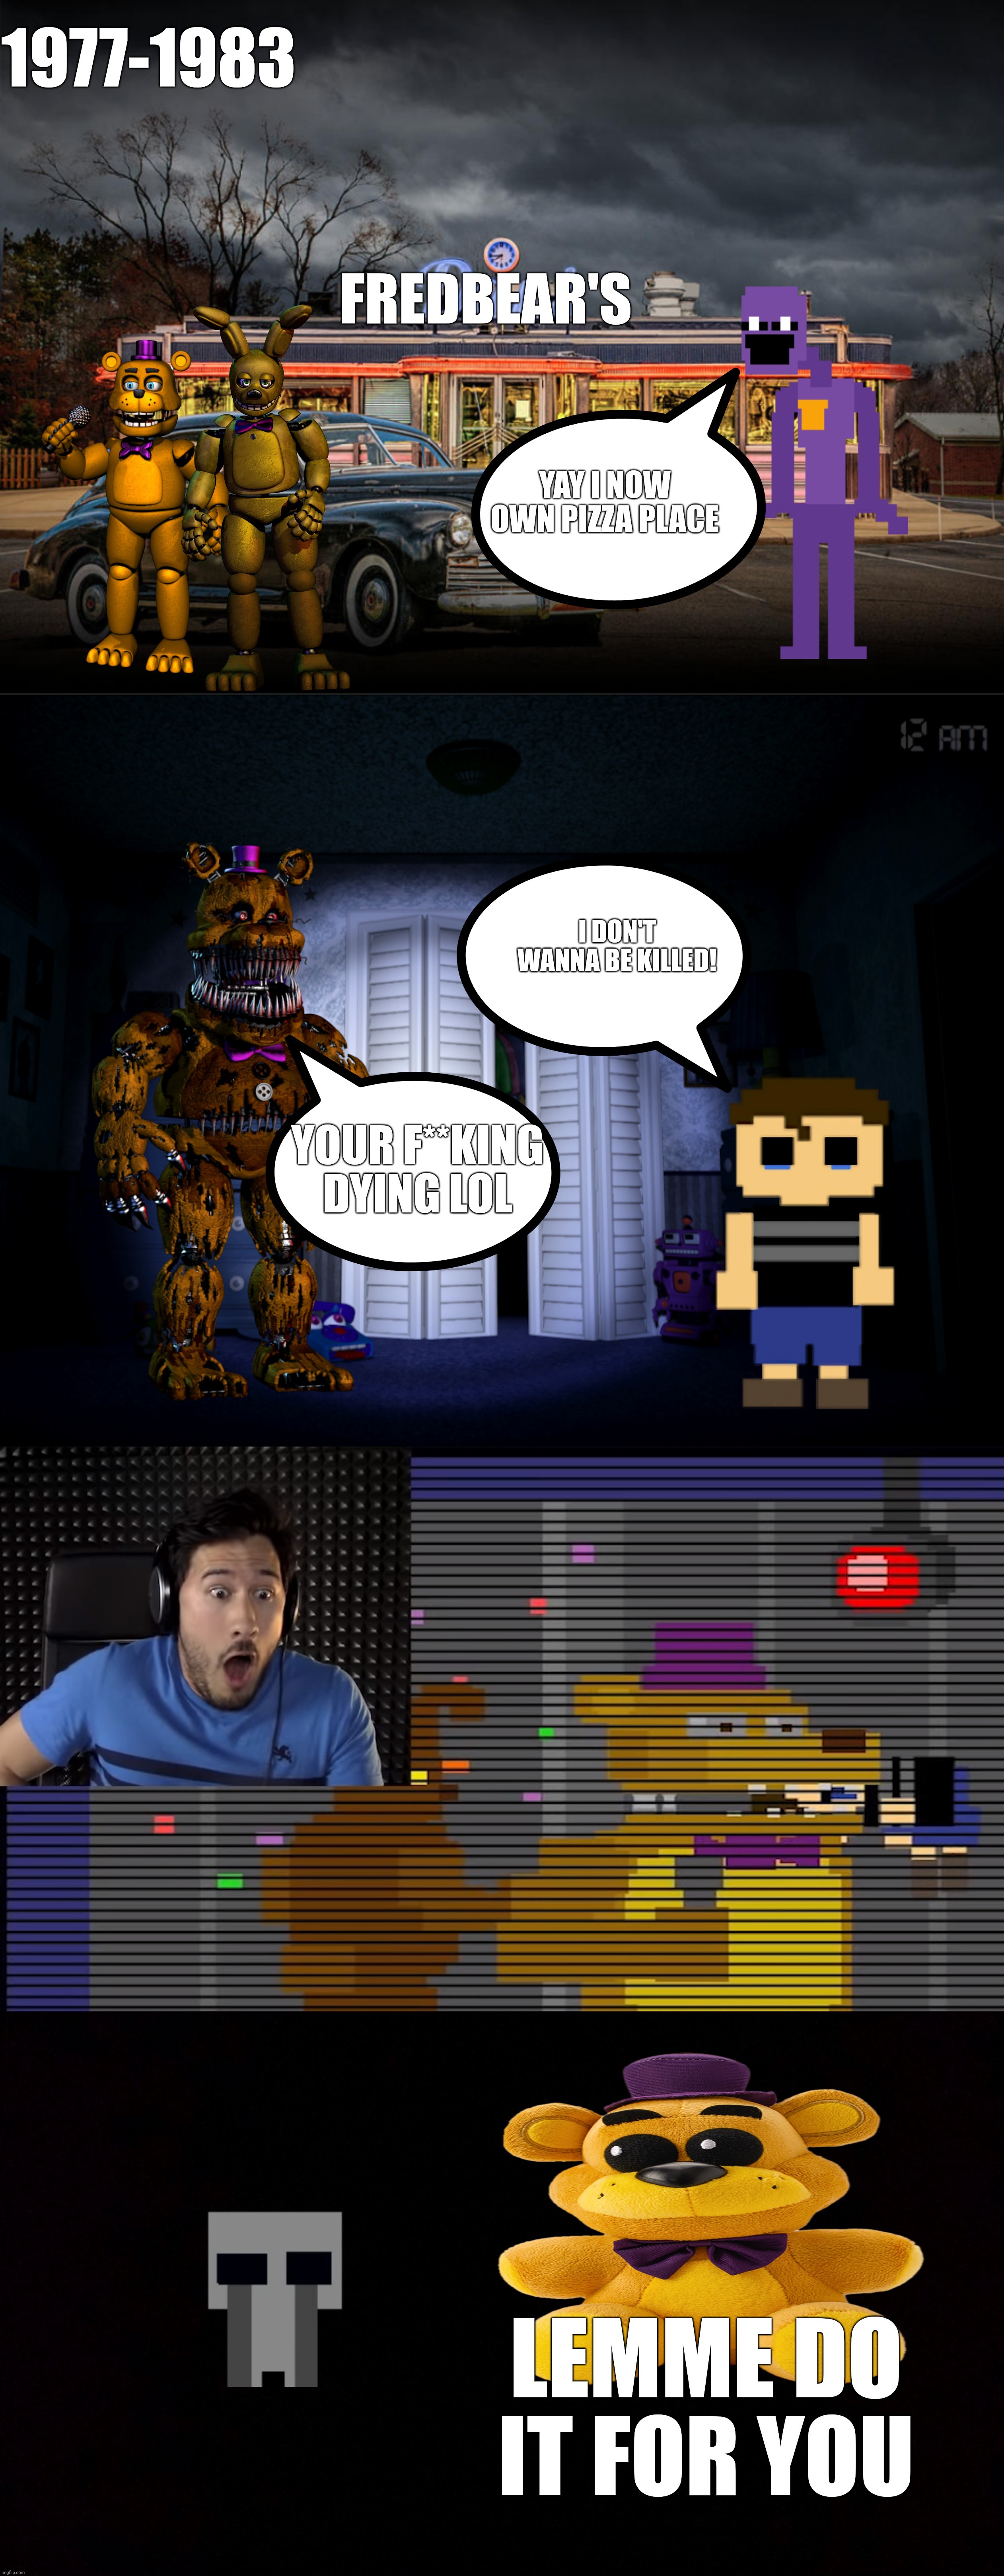 FNaF lore explained in images collaboration: 1977-1983 | made w/ Imgflip meme maker